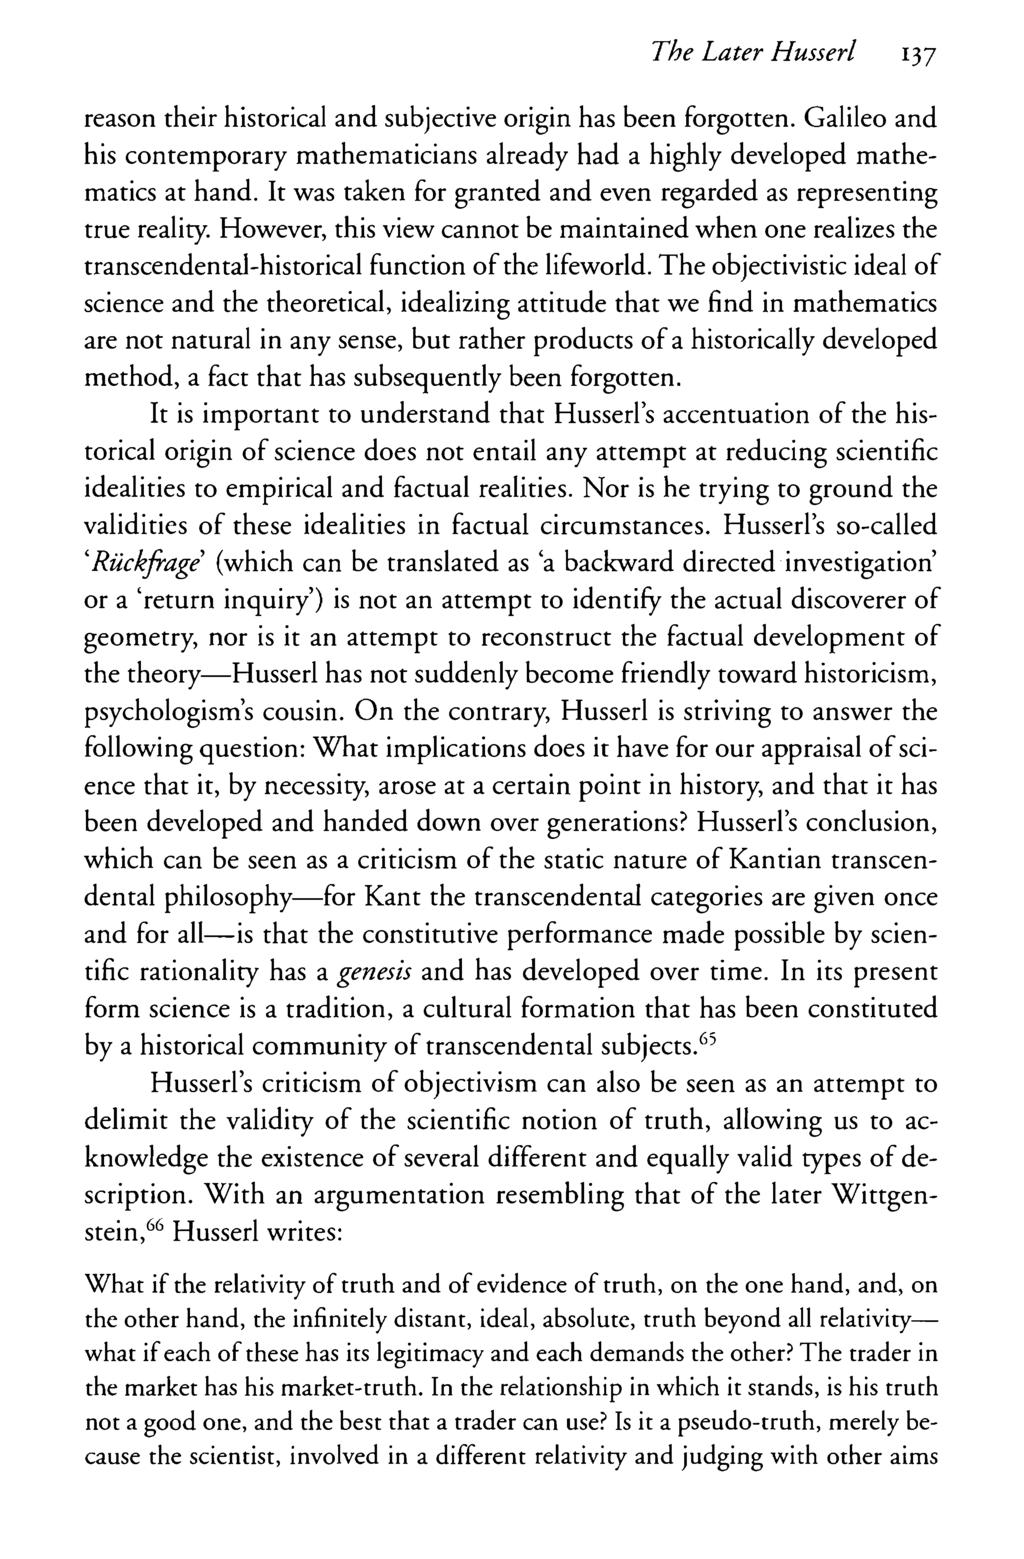 The Later Husserl 137 reason their historical and subjective origin has been forgotten. Galileo and his contemporary mathematicians already had a highly developed mathematics at hand.